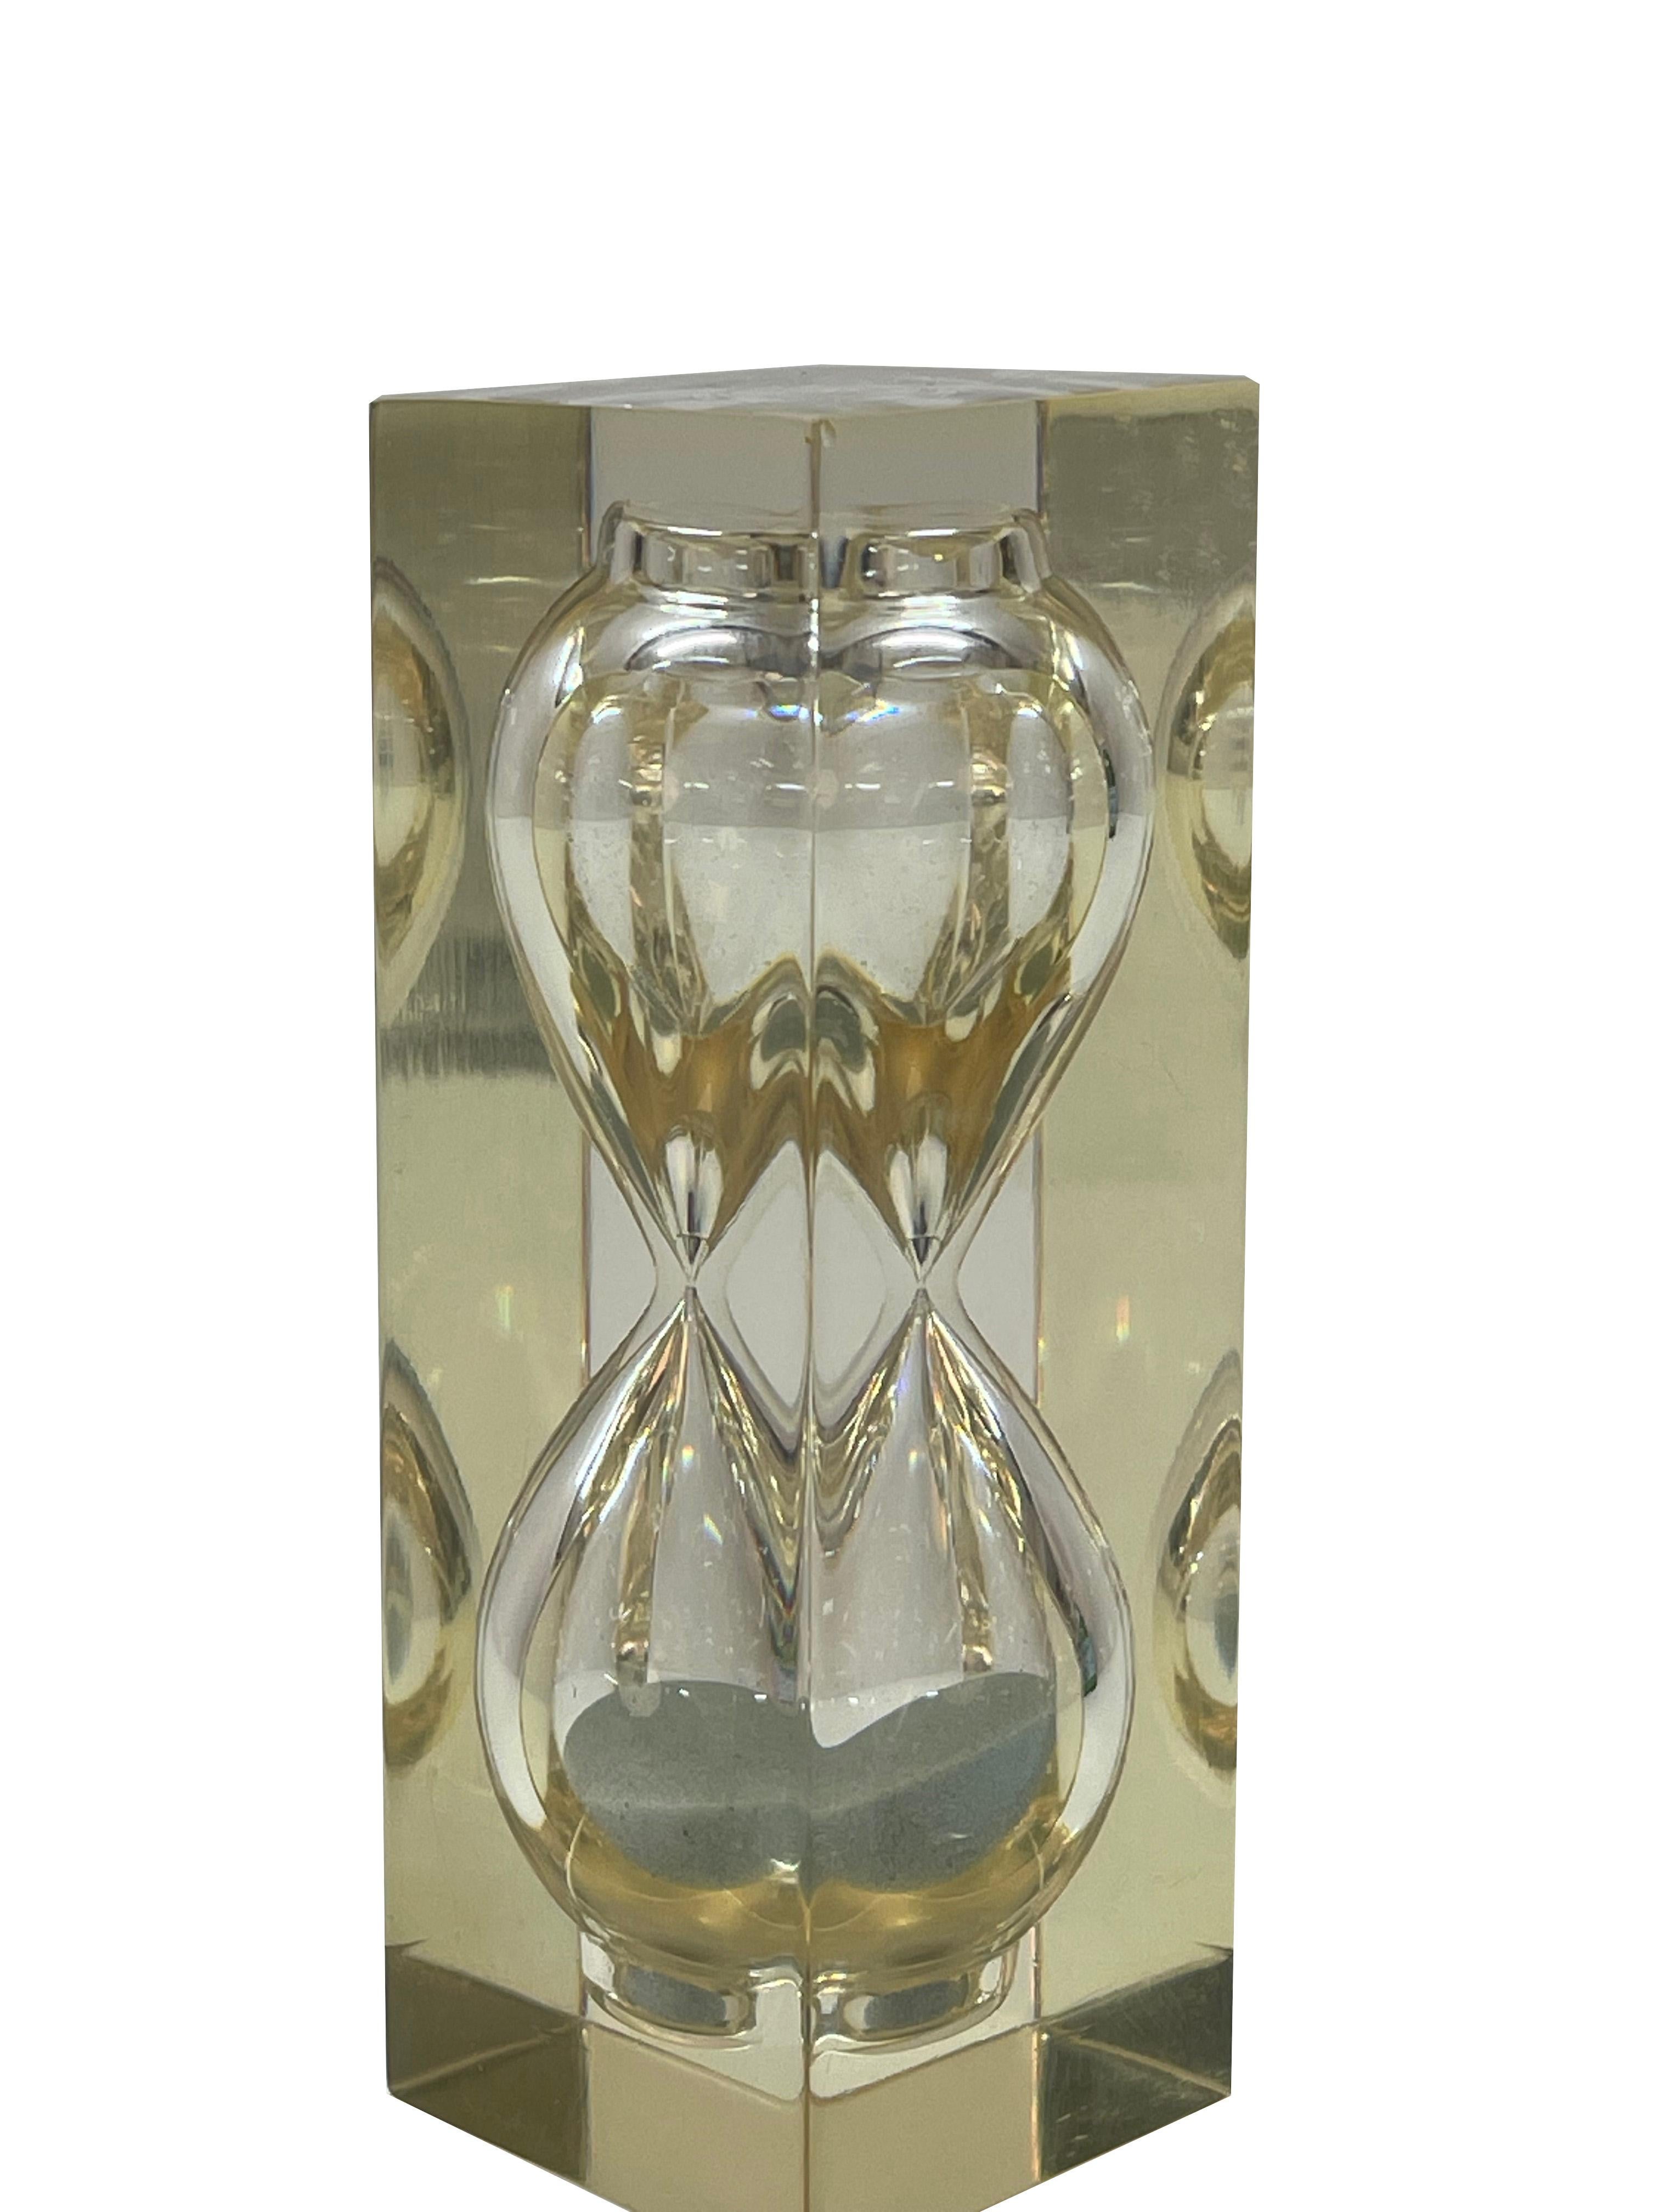 Midcentury Lucite Hourglass Sand Timer Sculpture After Charles Hollis Jones 1970 For Sale 4